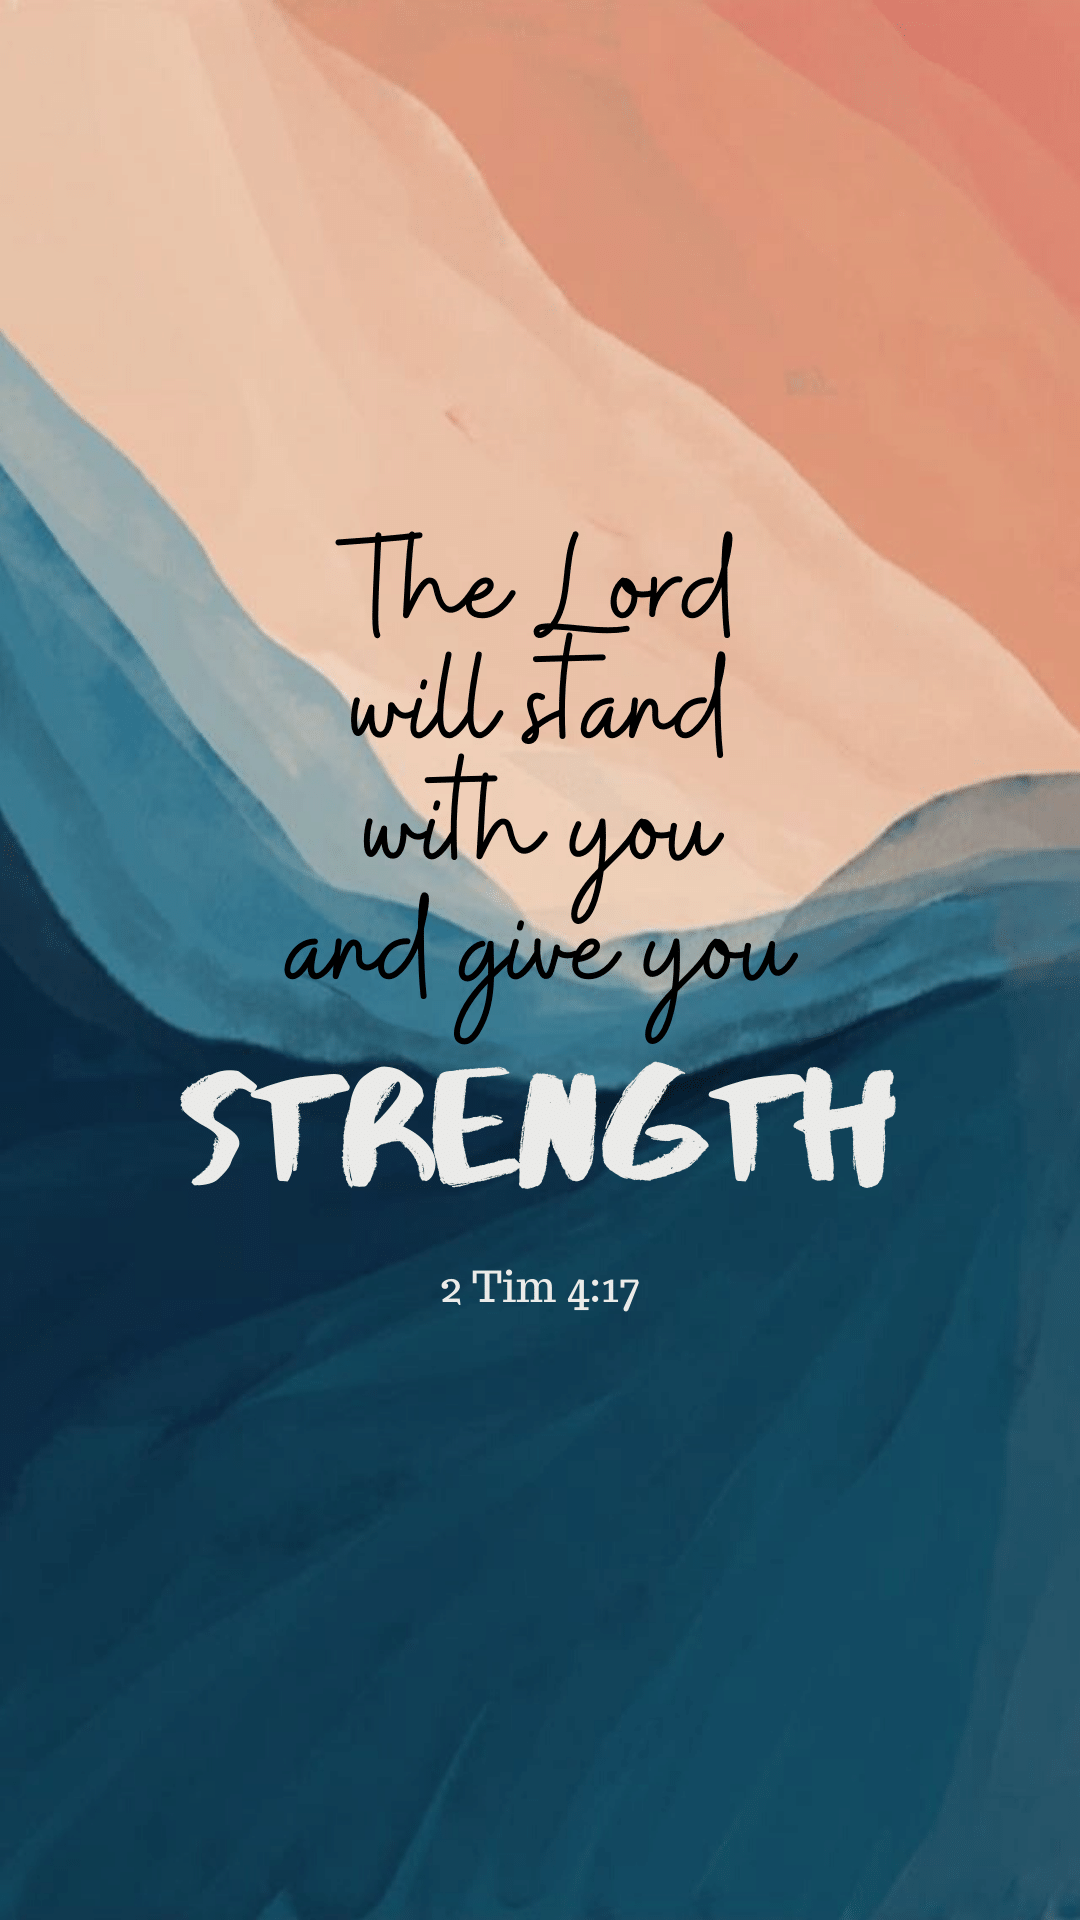 Encouraging Quotes And Bible Verses Wallpaper